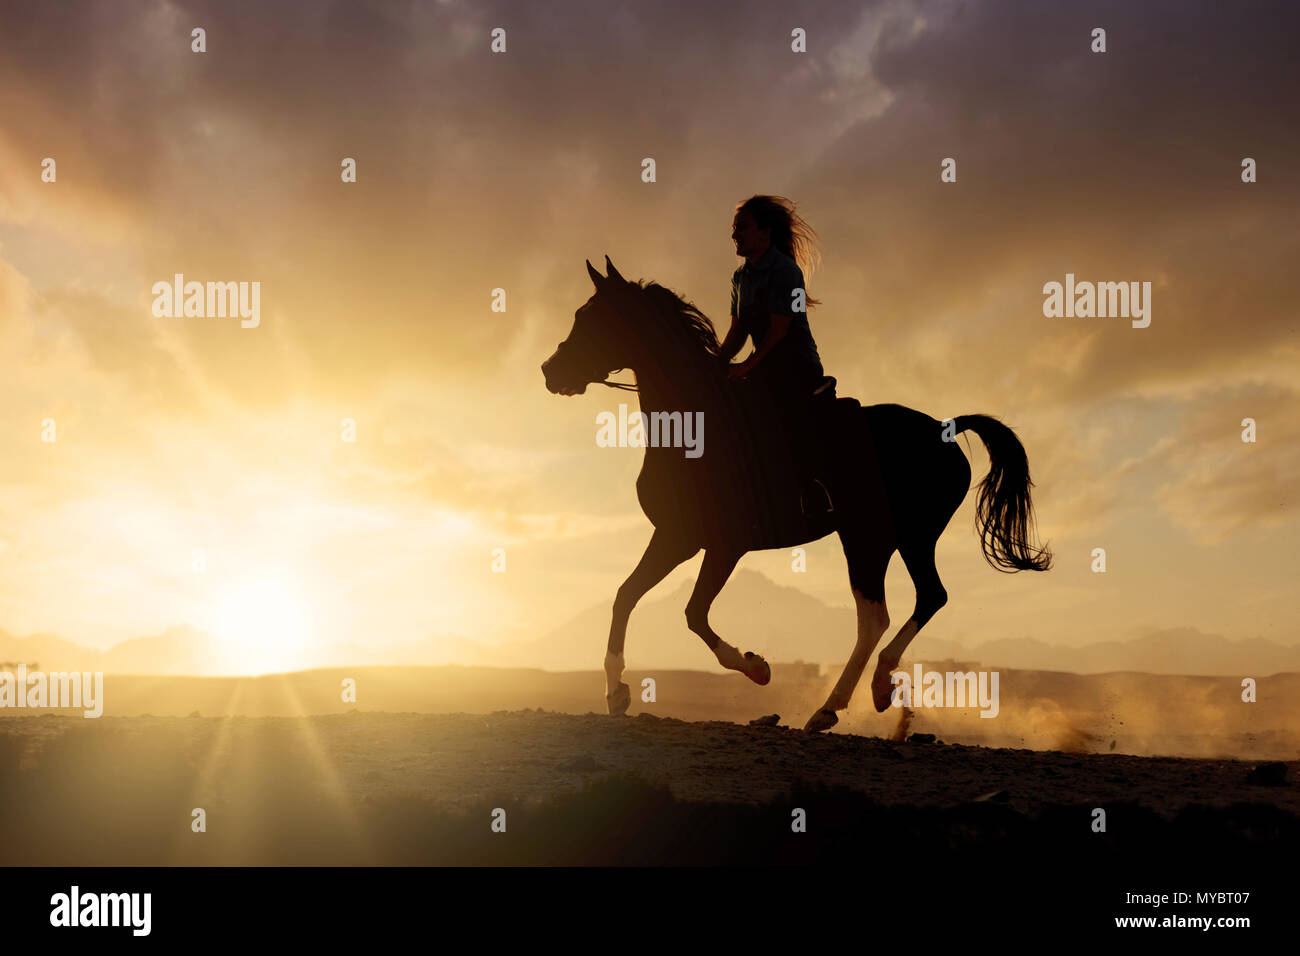 Domestic horse. Rider on a mare galopping in the desert, silhouetted against the setting sun. Egypt Stock Photo